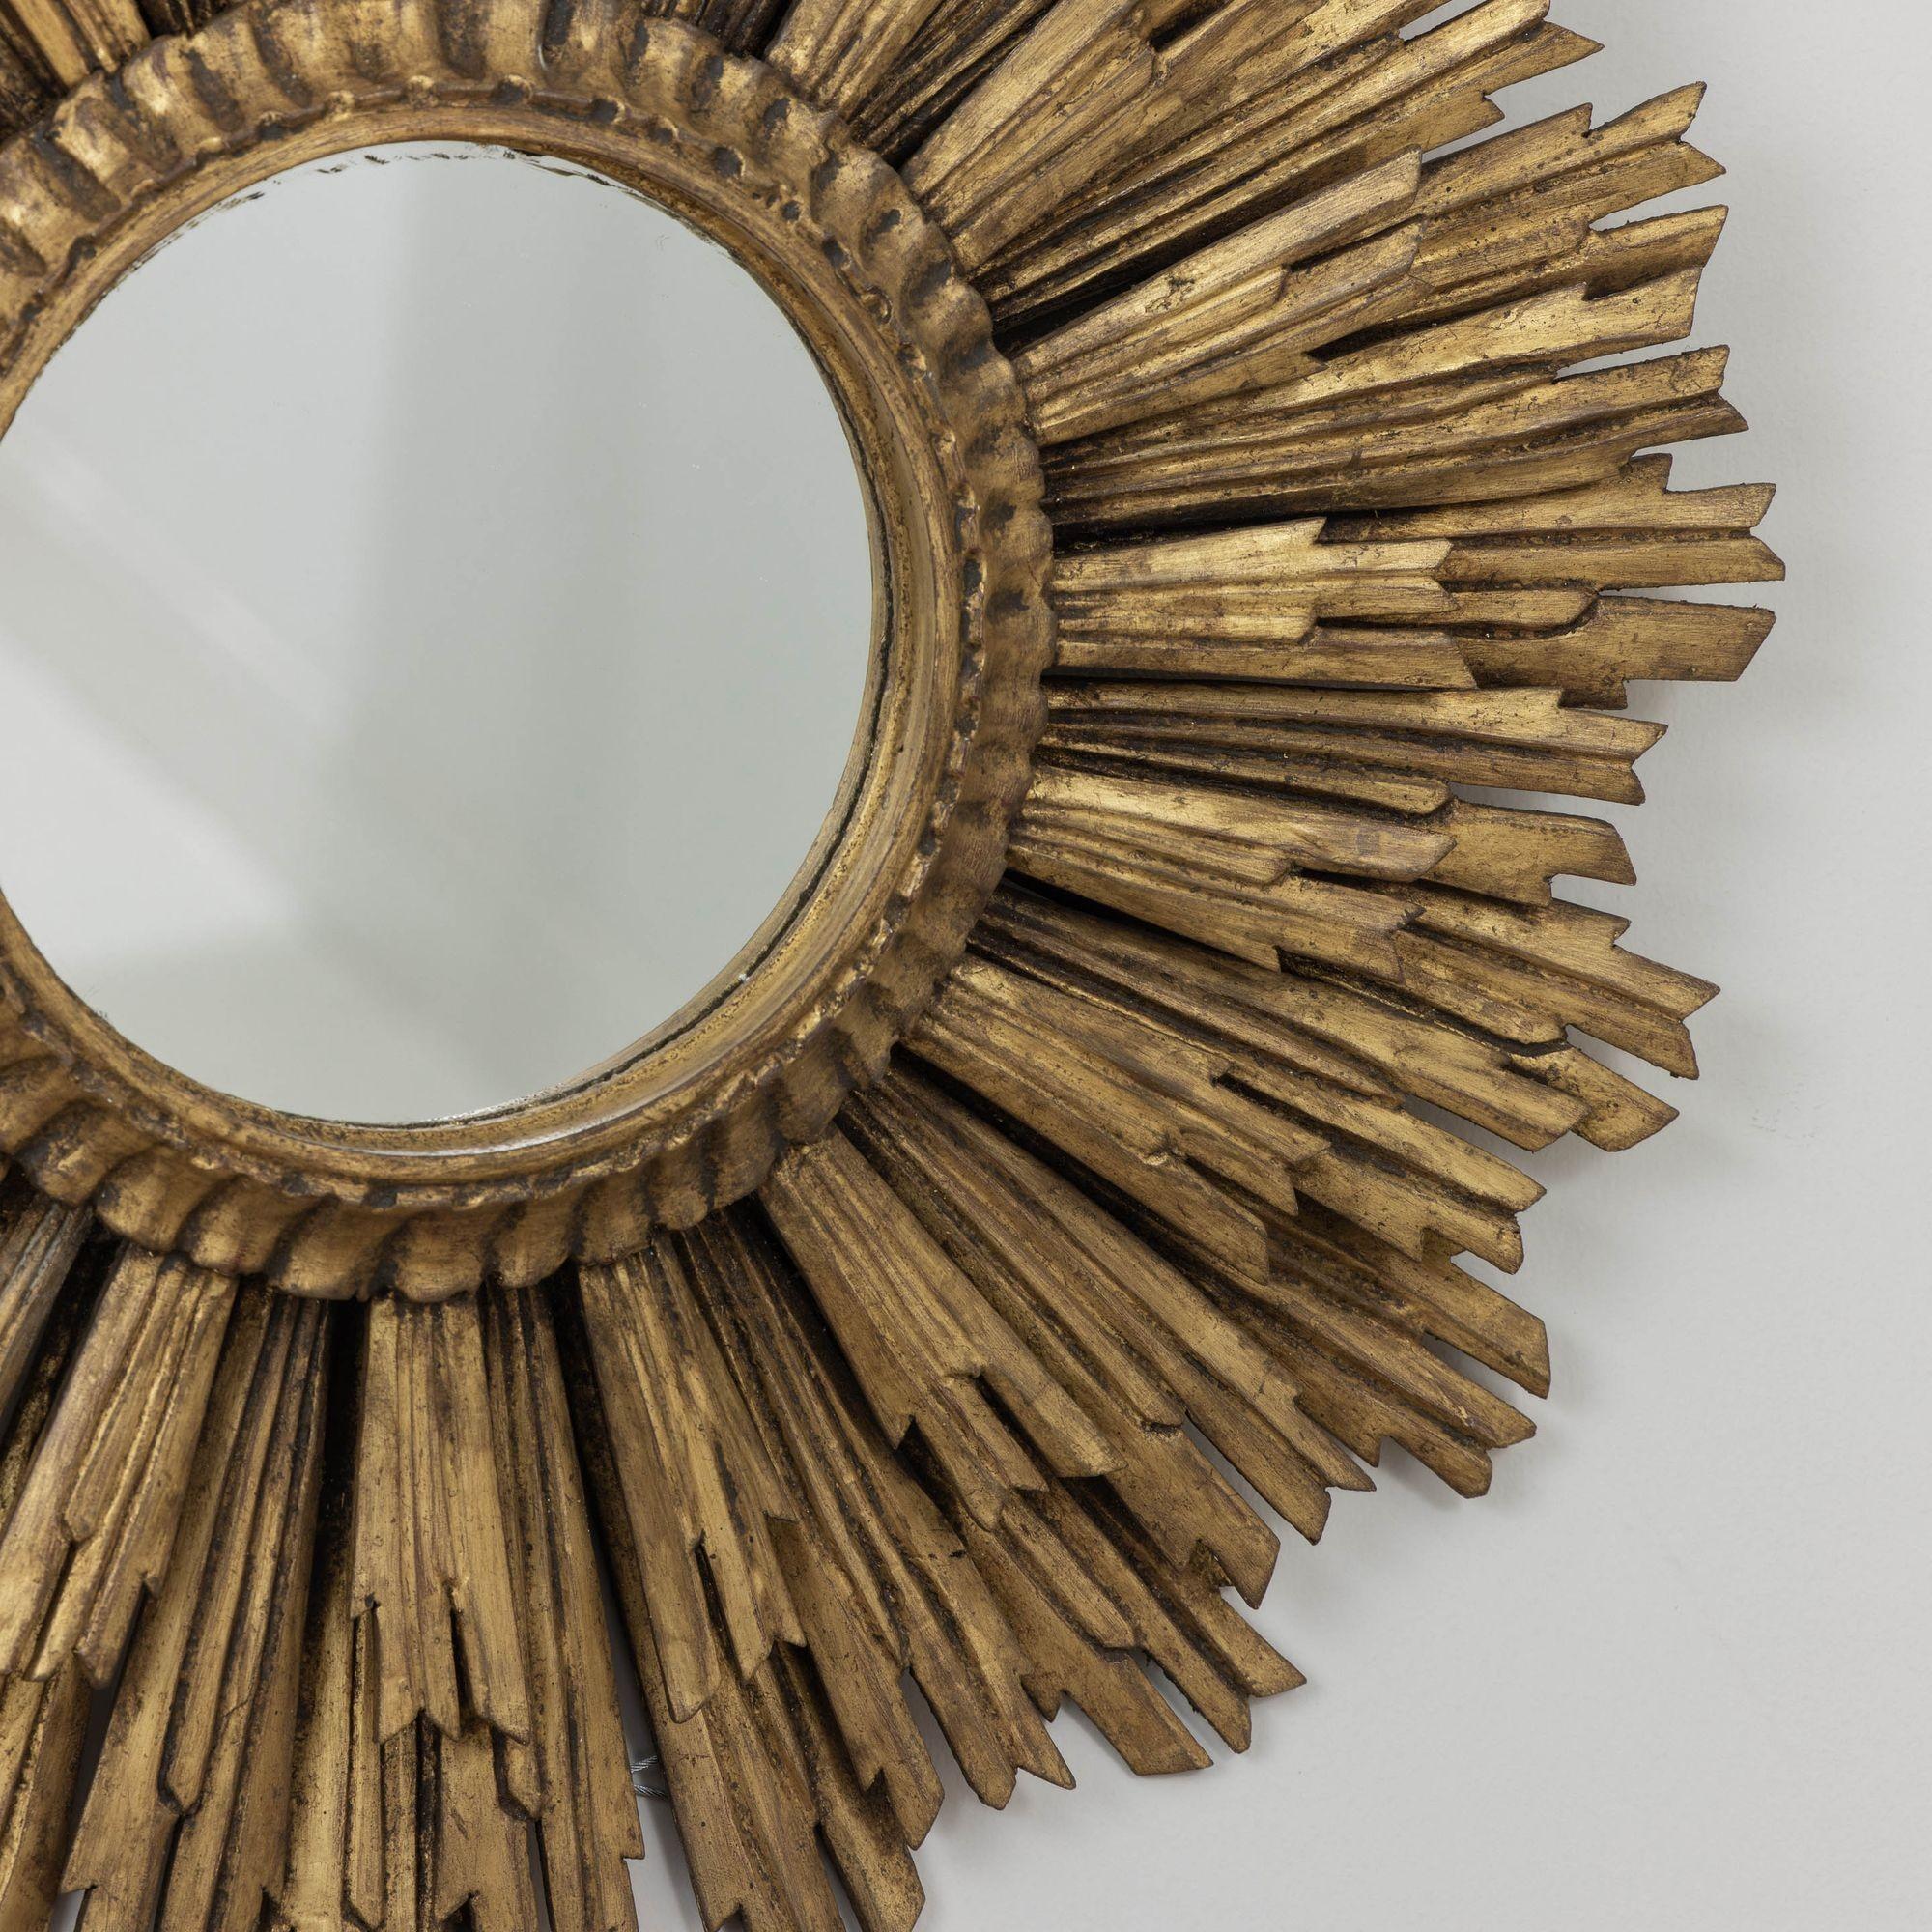 Large Early -Mid 20th c. French Art Deco Giltwood Sunburst Mirror For Sale 2